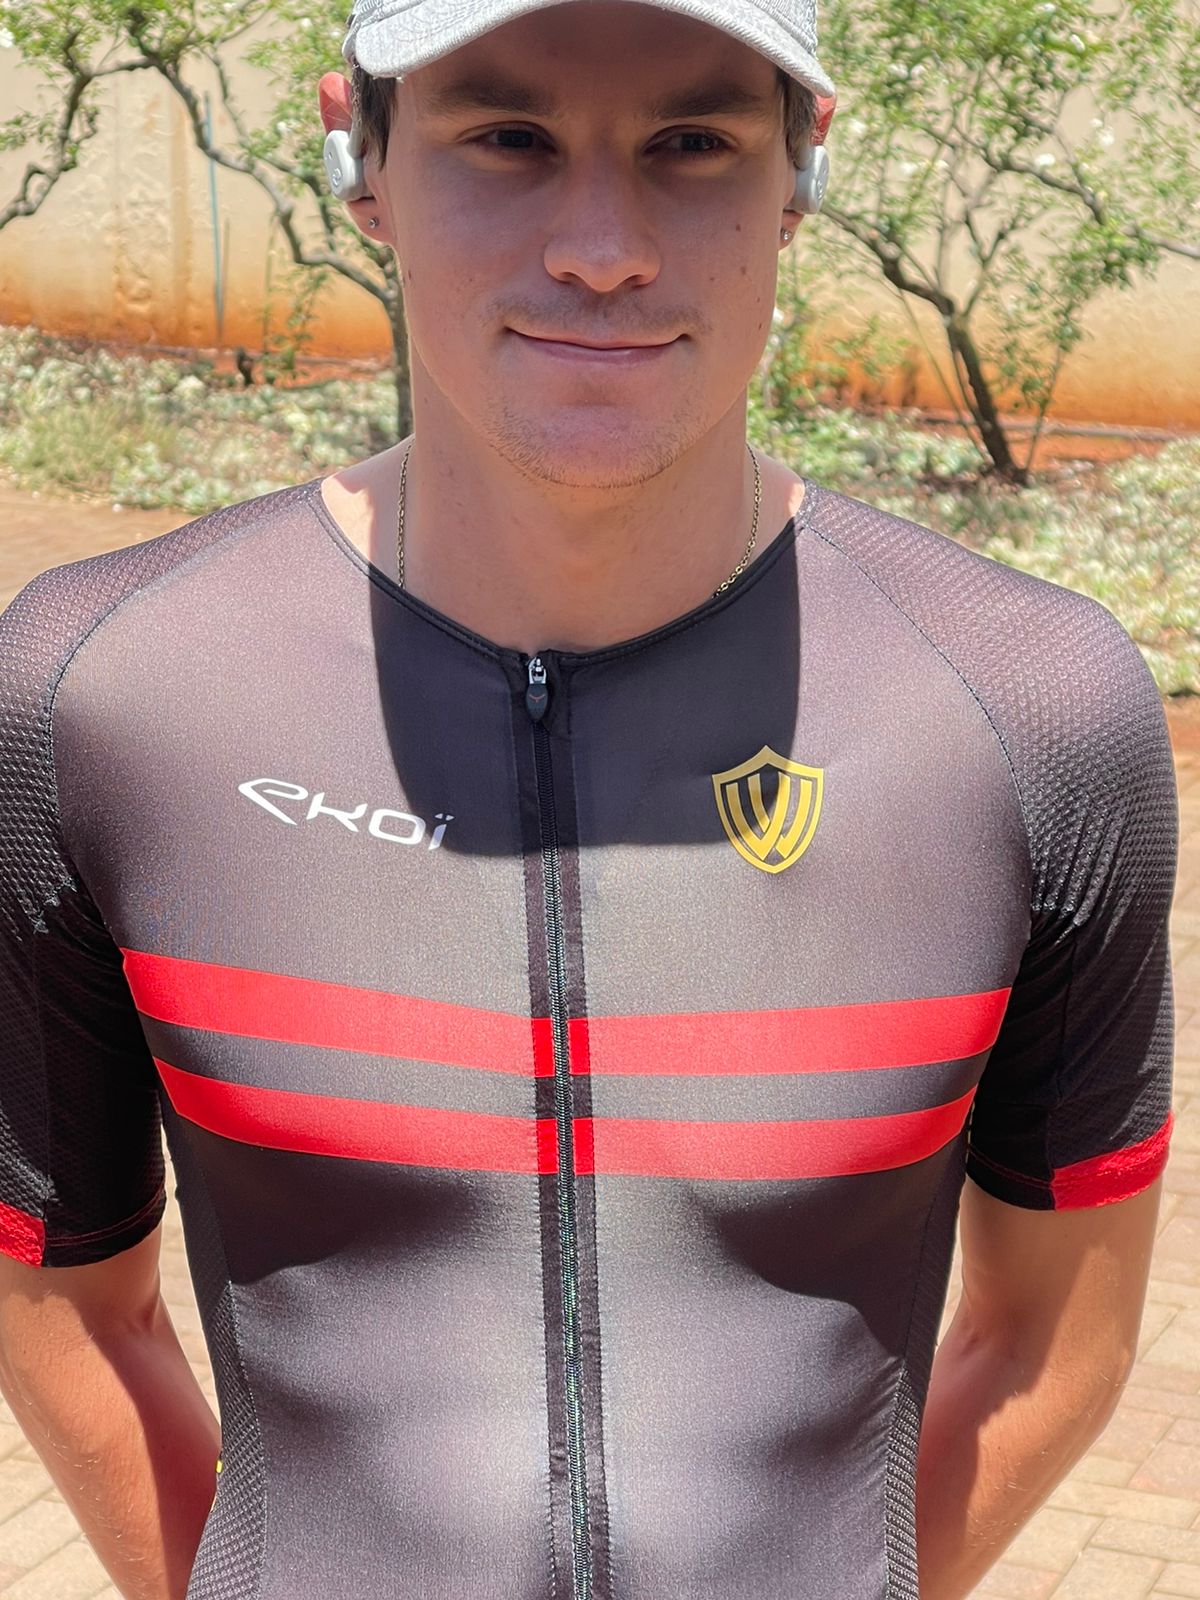 Matthew Greer exudes anticipation, geared up in his Winspace Tri Suit, ready to tackle the 1.9km swim at Ironman 70.3 Mosselbay.